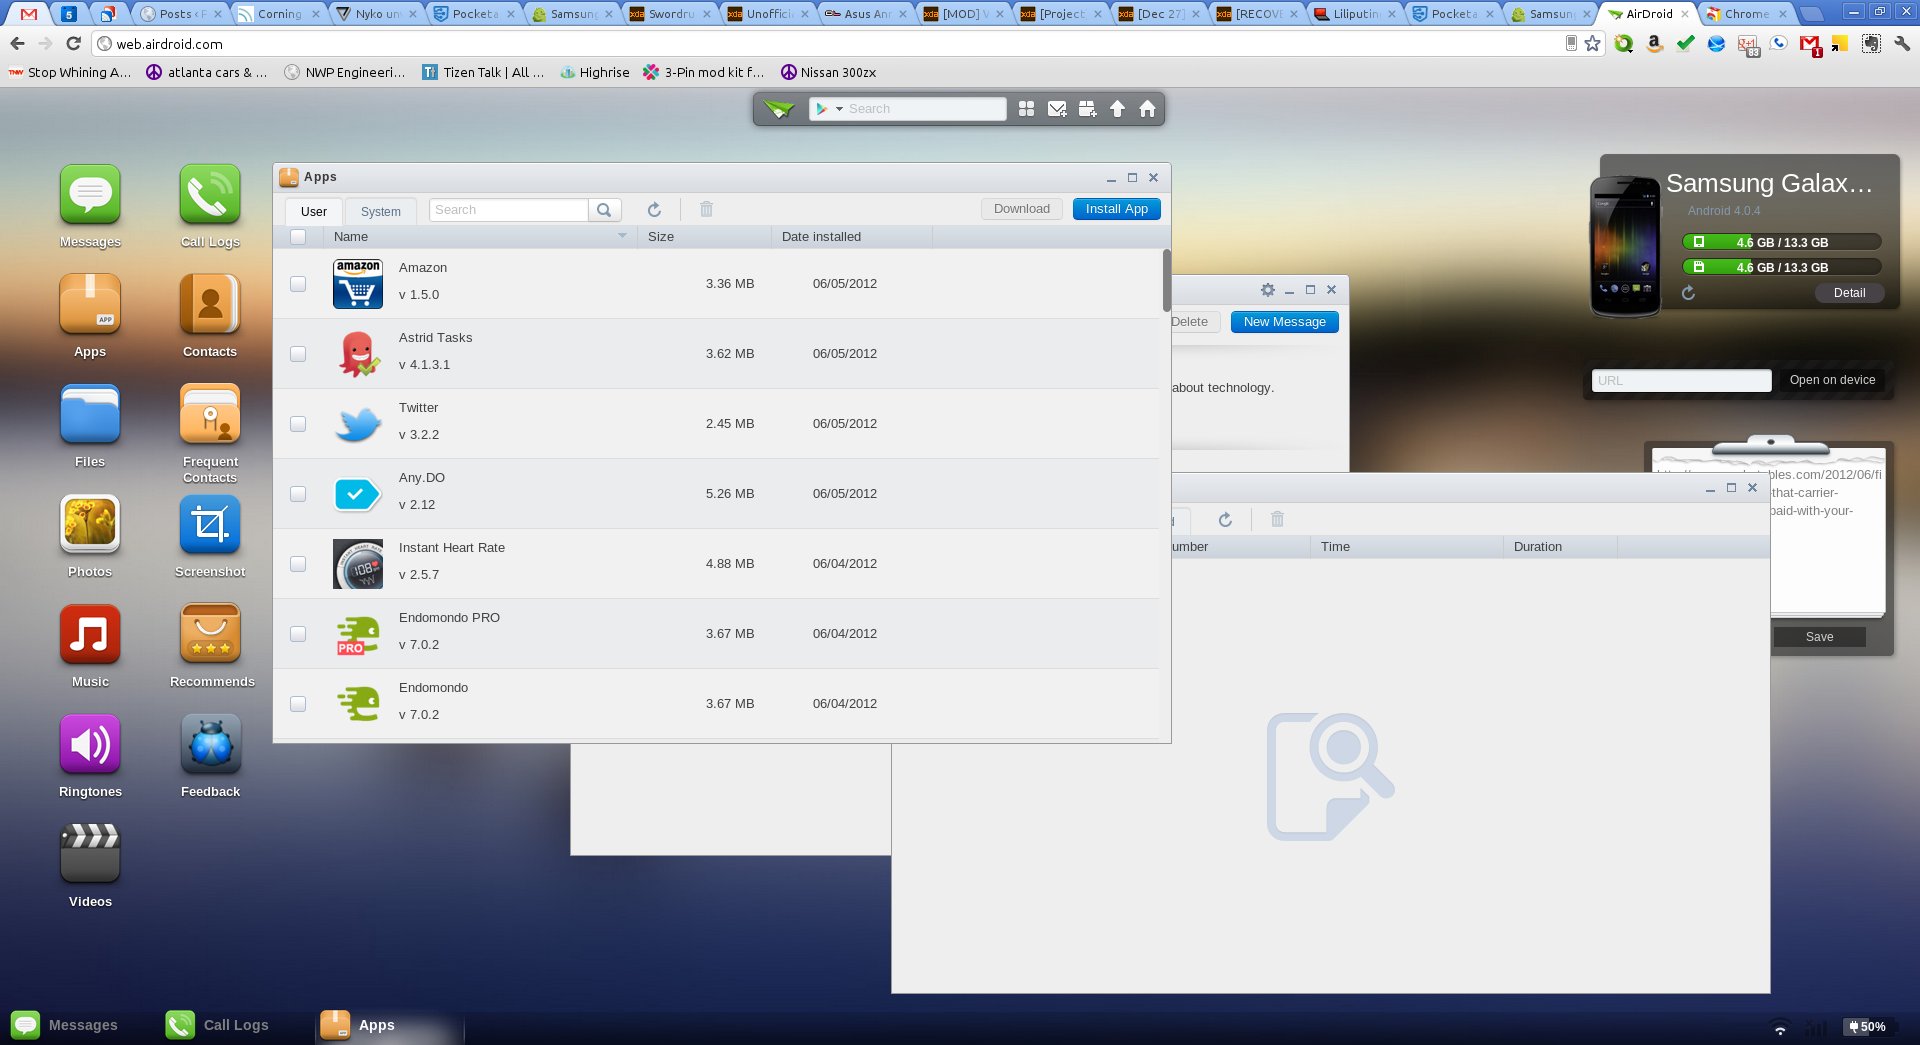 airdroid pc5 - for some reason we don't have an alt tag here